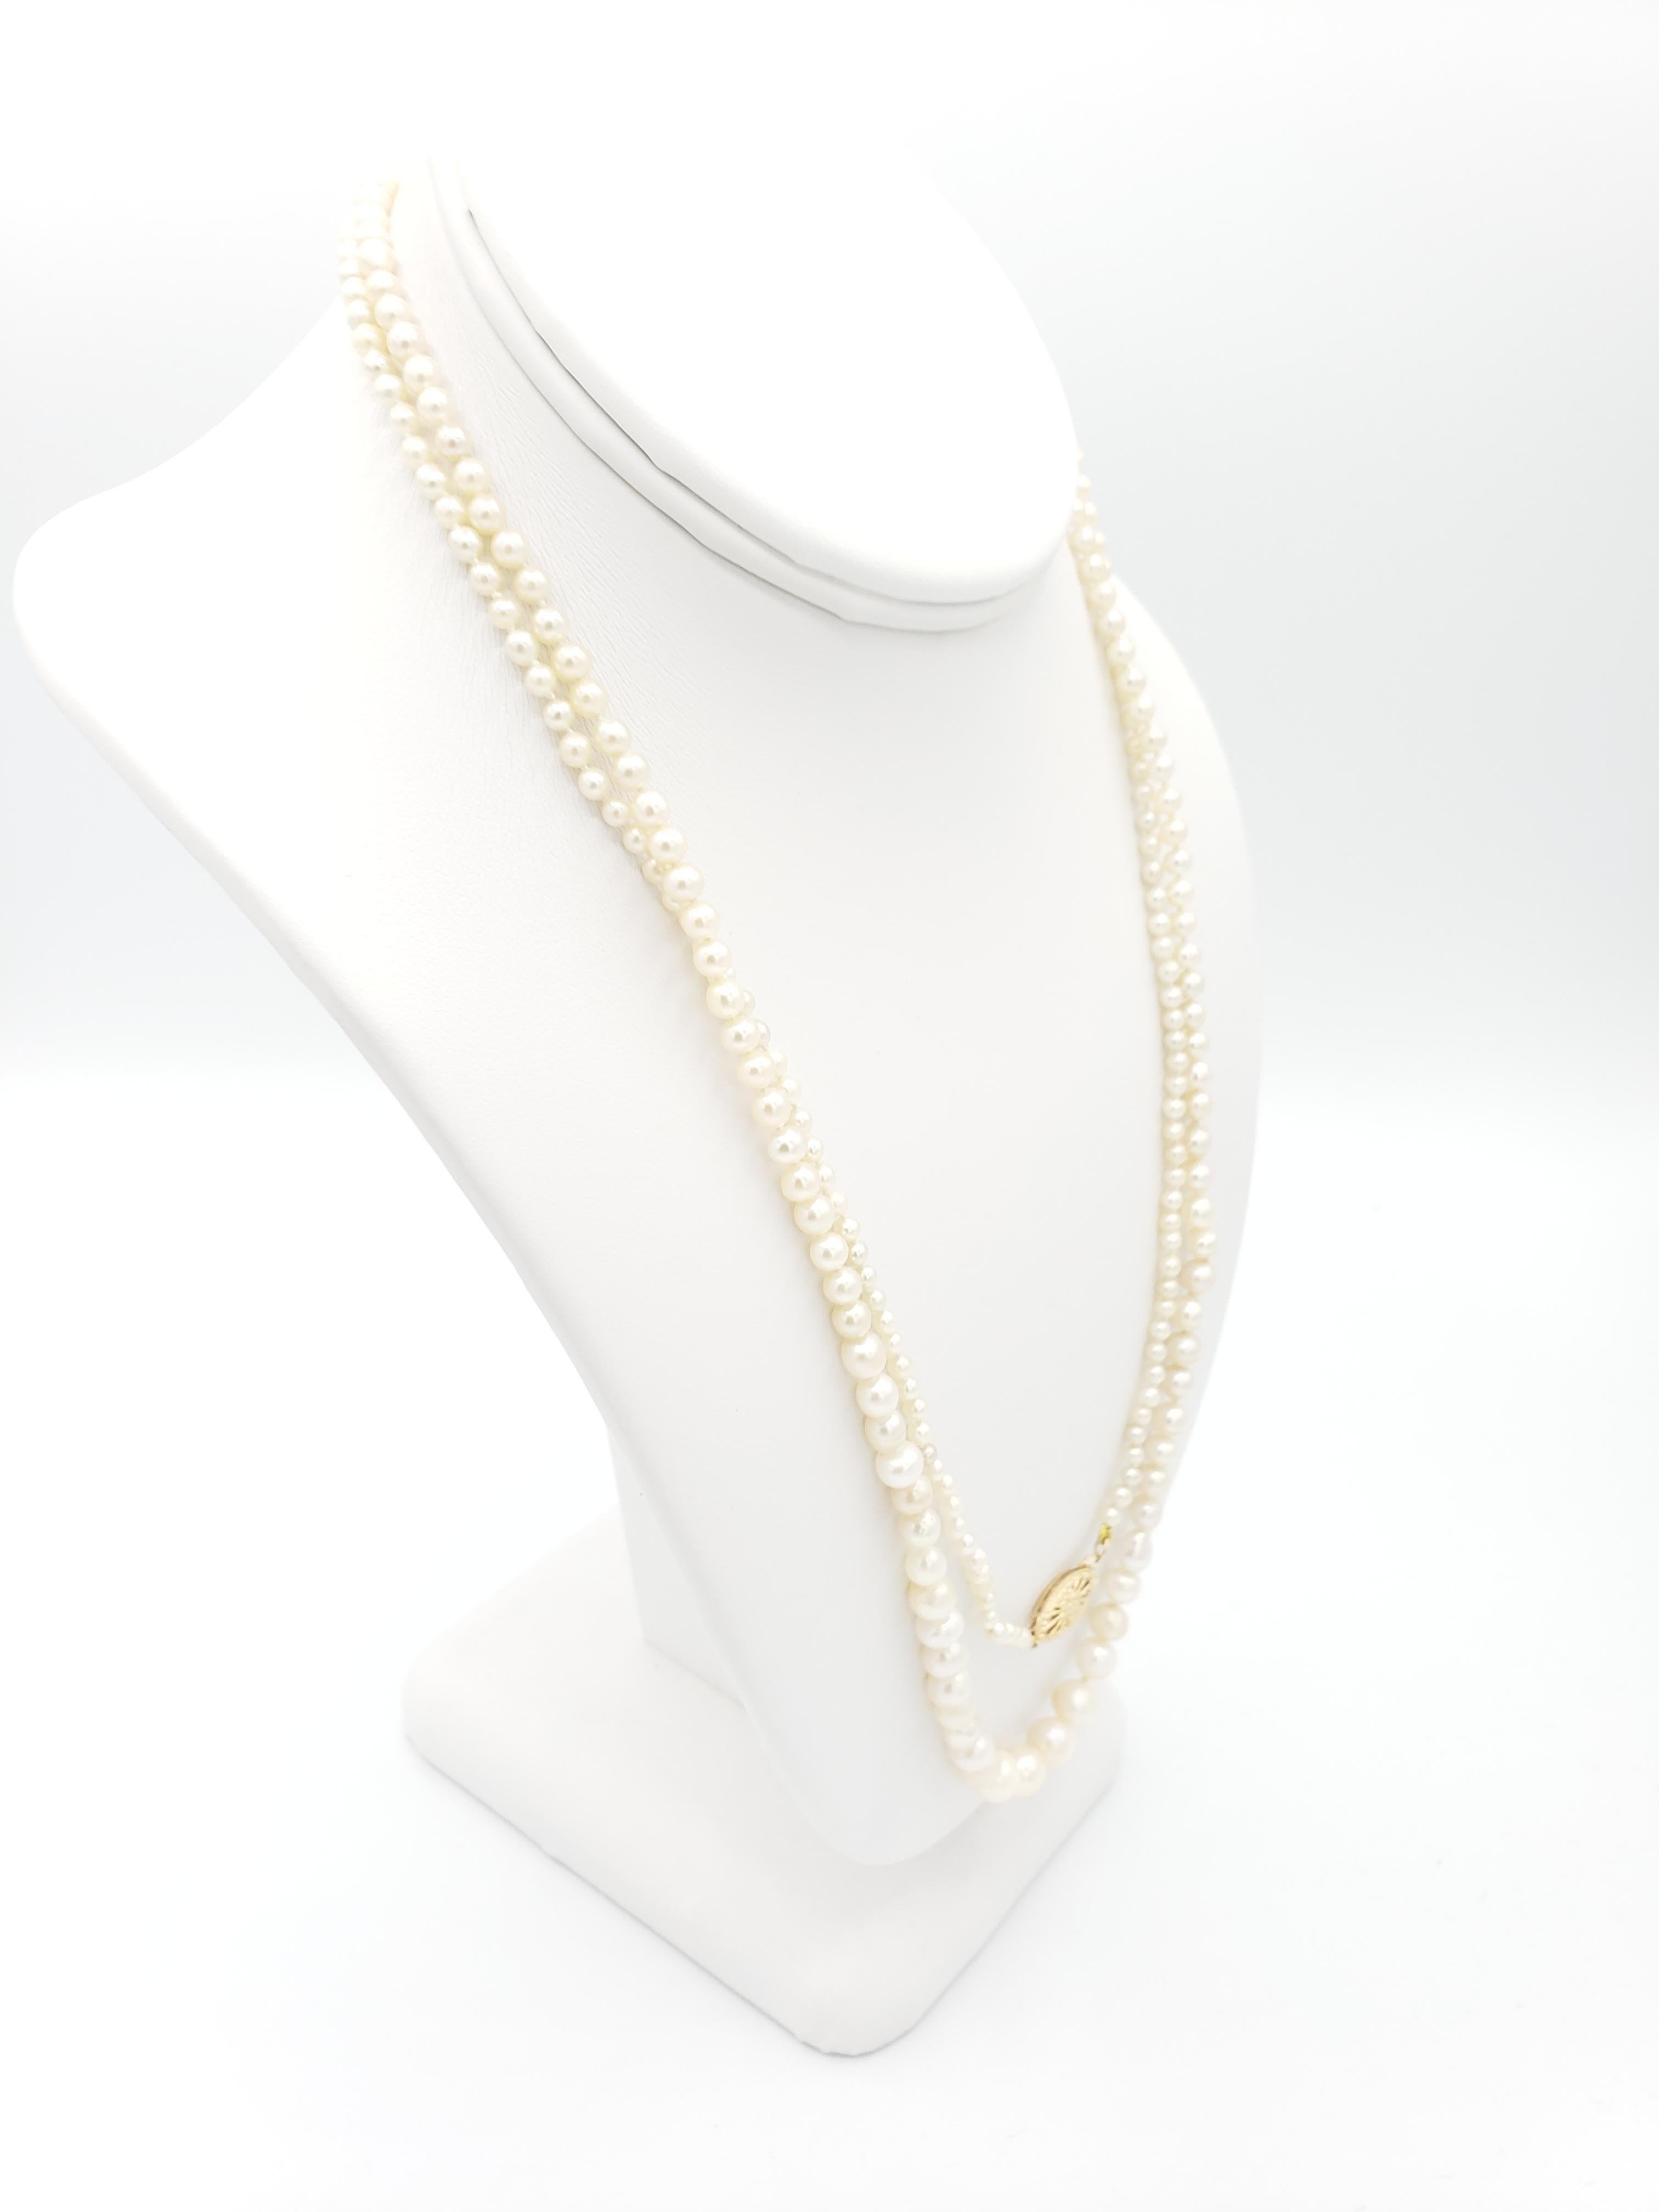 sea water pearl necklace